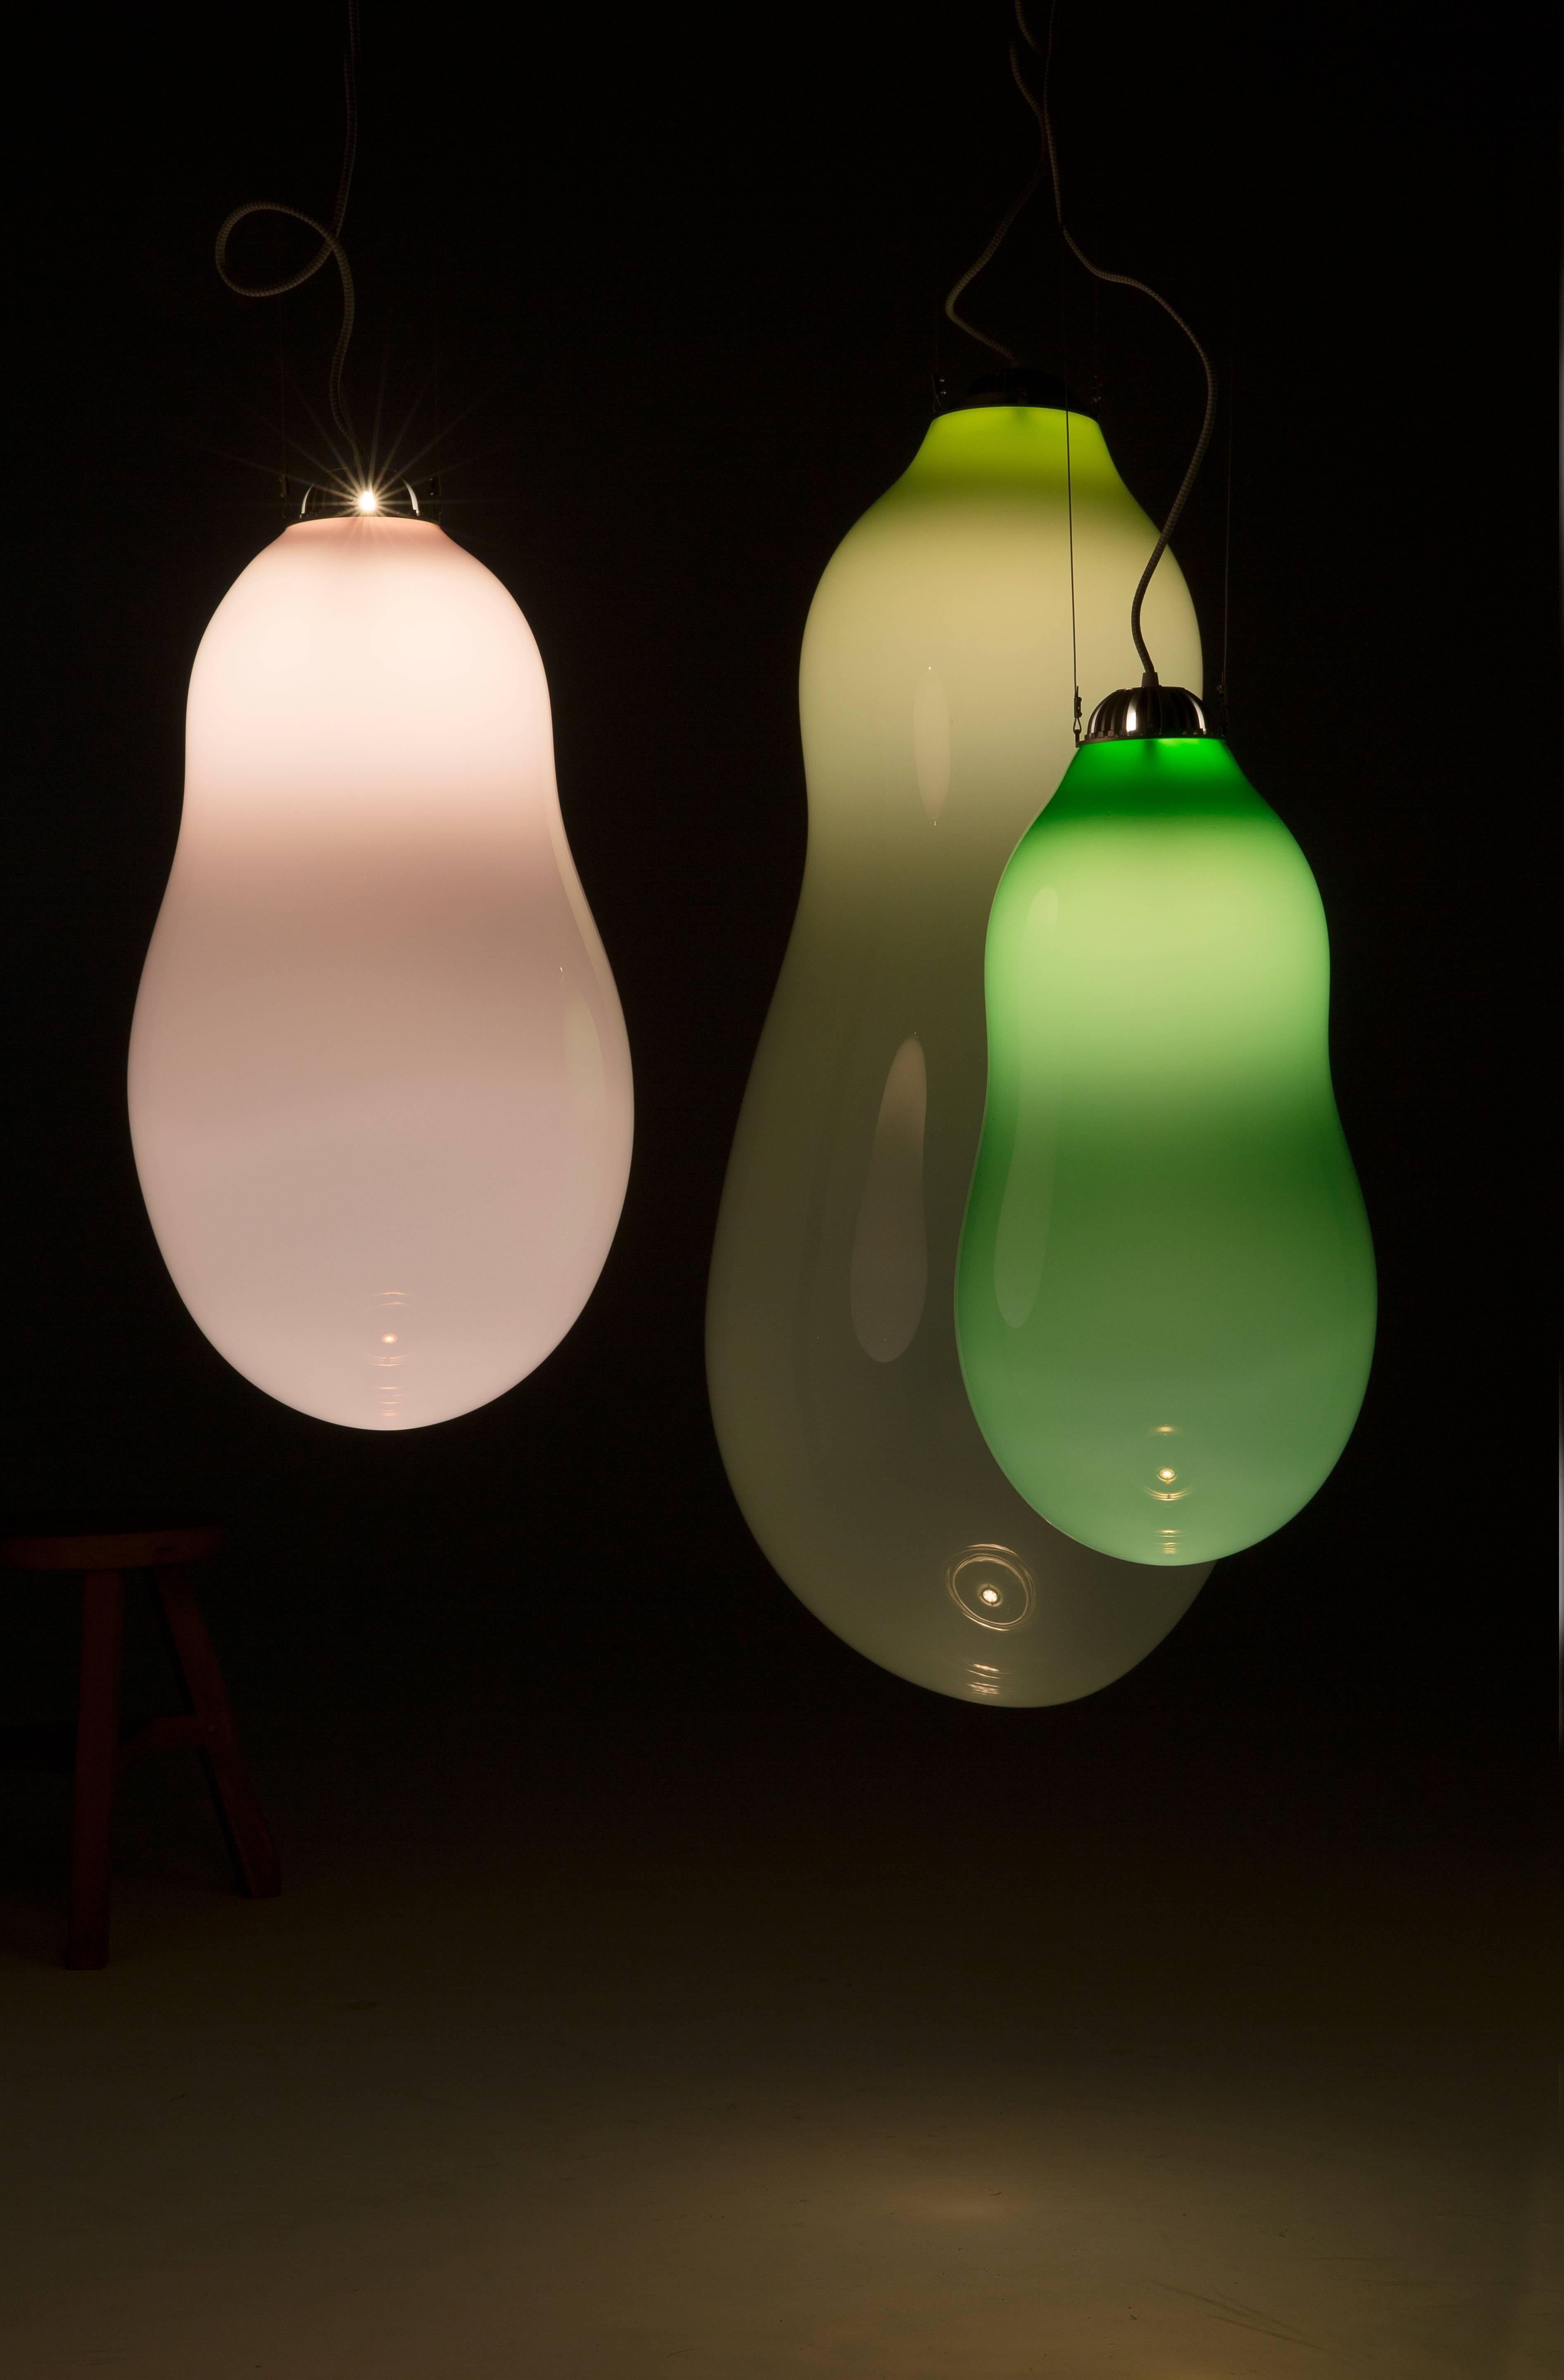 Colored extra large big bubble pendants by Alex de Witte
Dimensions: D 41 x H 110 cm
Materials: Mouth Blown Glass.

Exact precise dimensions are not guaranteed, width is always different but generally can only reach 25-40% of the height. Please